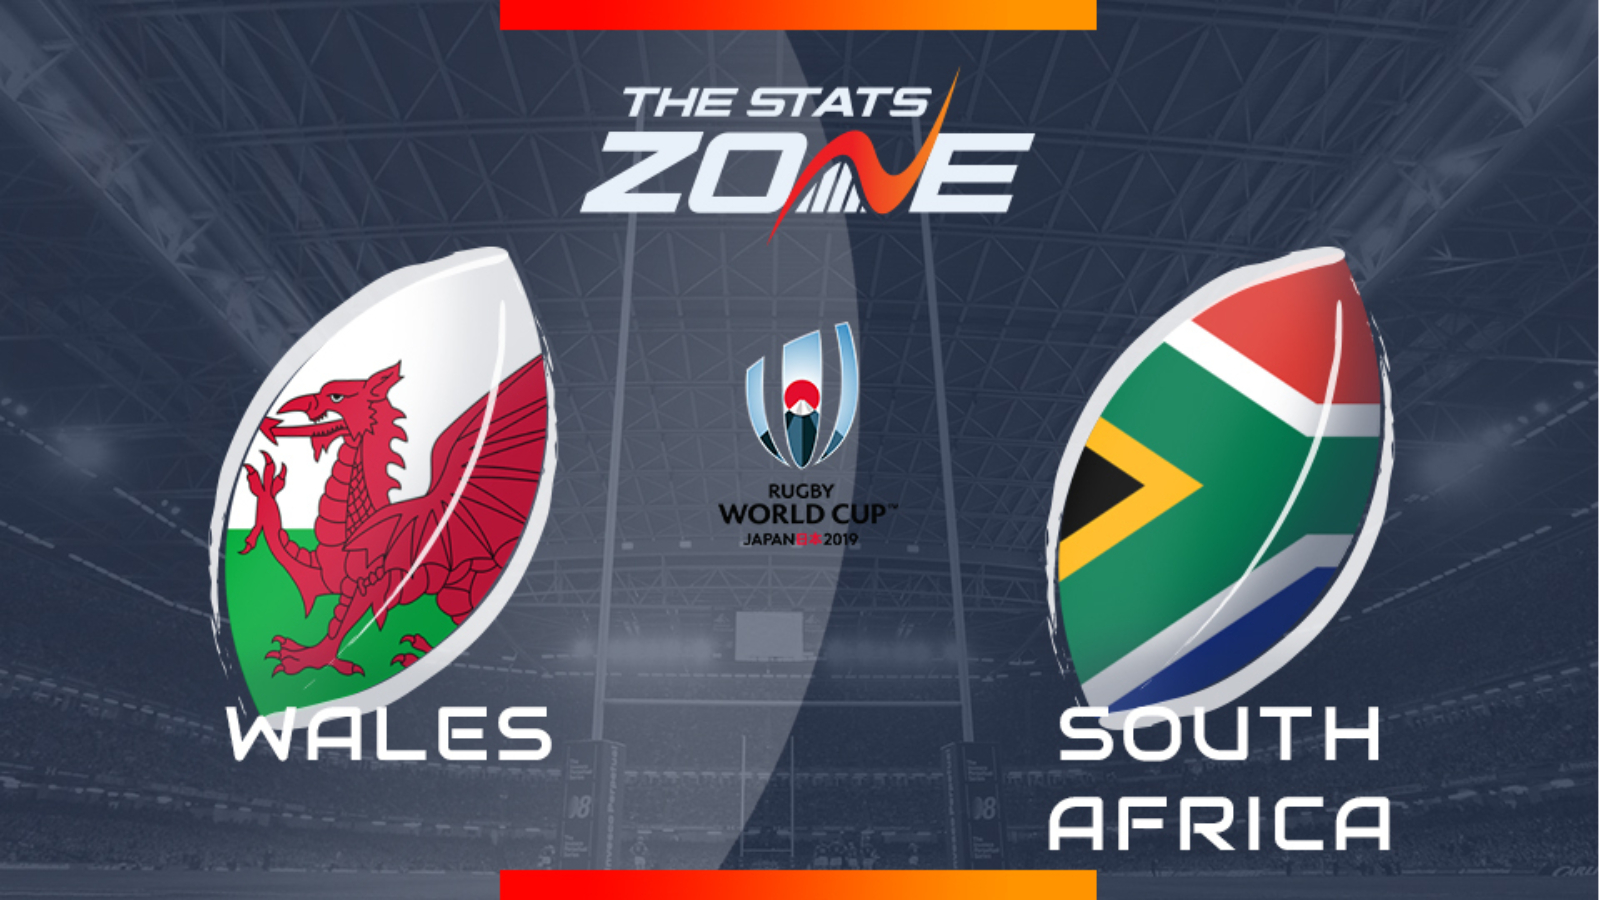 2019 Rugby World Cup Wales vs South Africa Preview & Prediction The